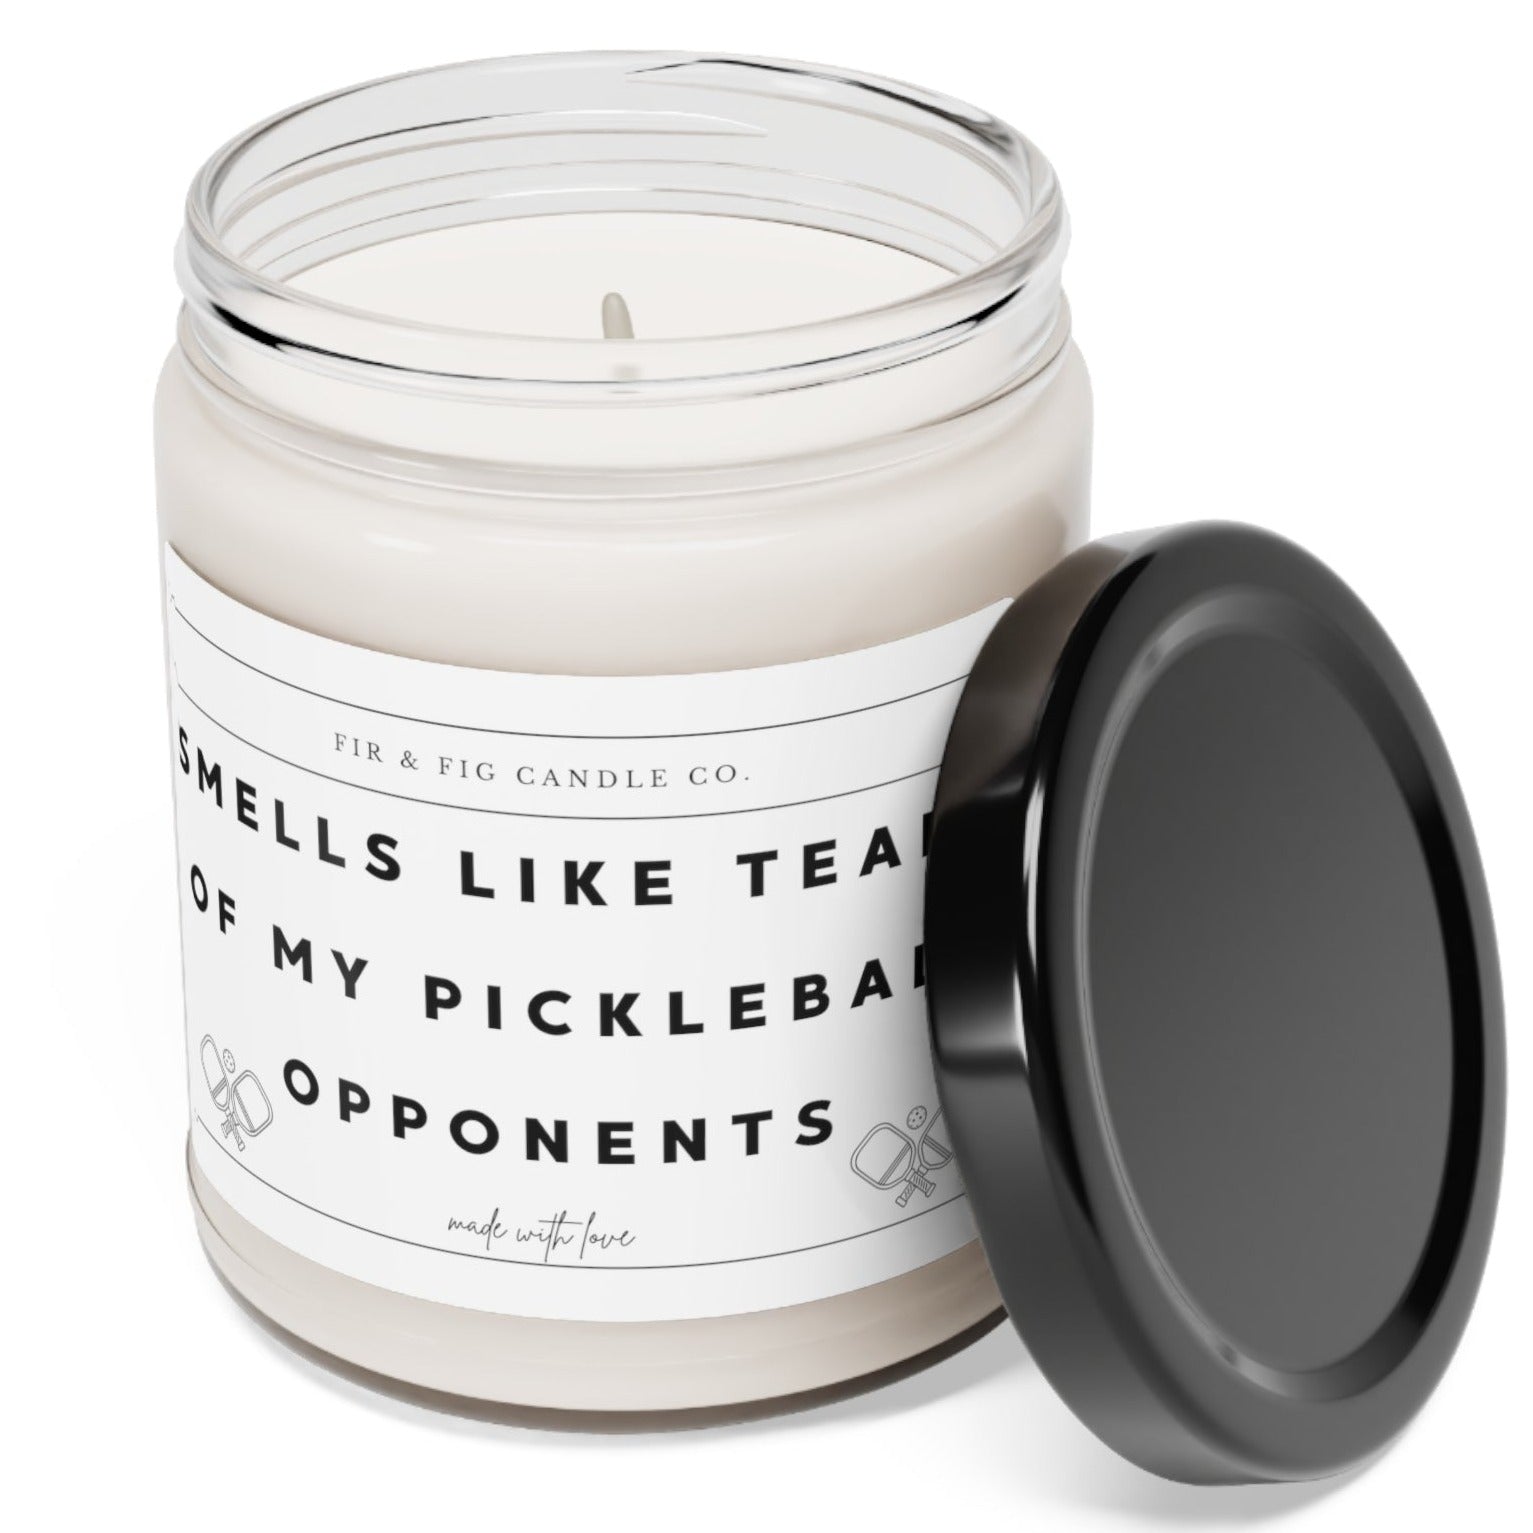 Tears of My Pickleball Opponents 9oz Candle, Funny Candles, Gift for Him, candle Gifts, Birthday Gift, dad gift, mom gift, pickleball mom